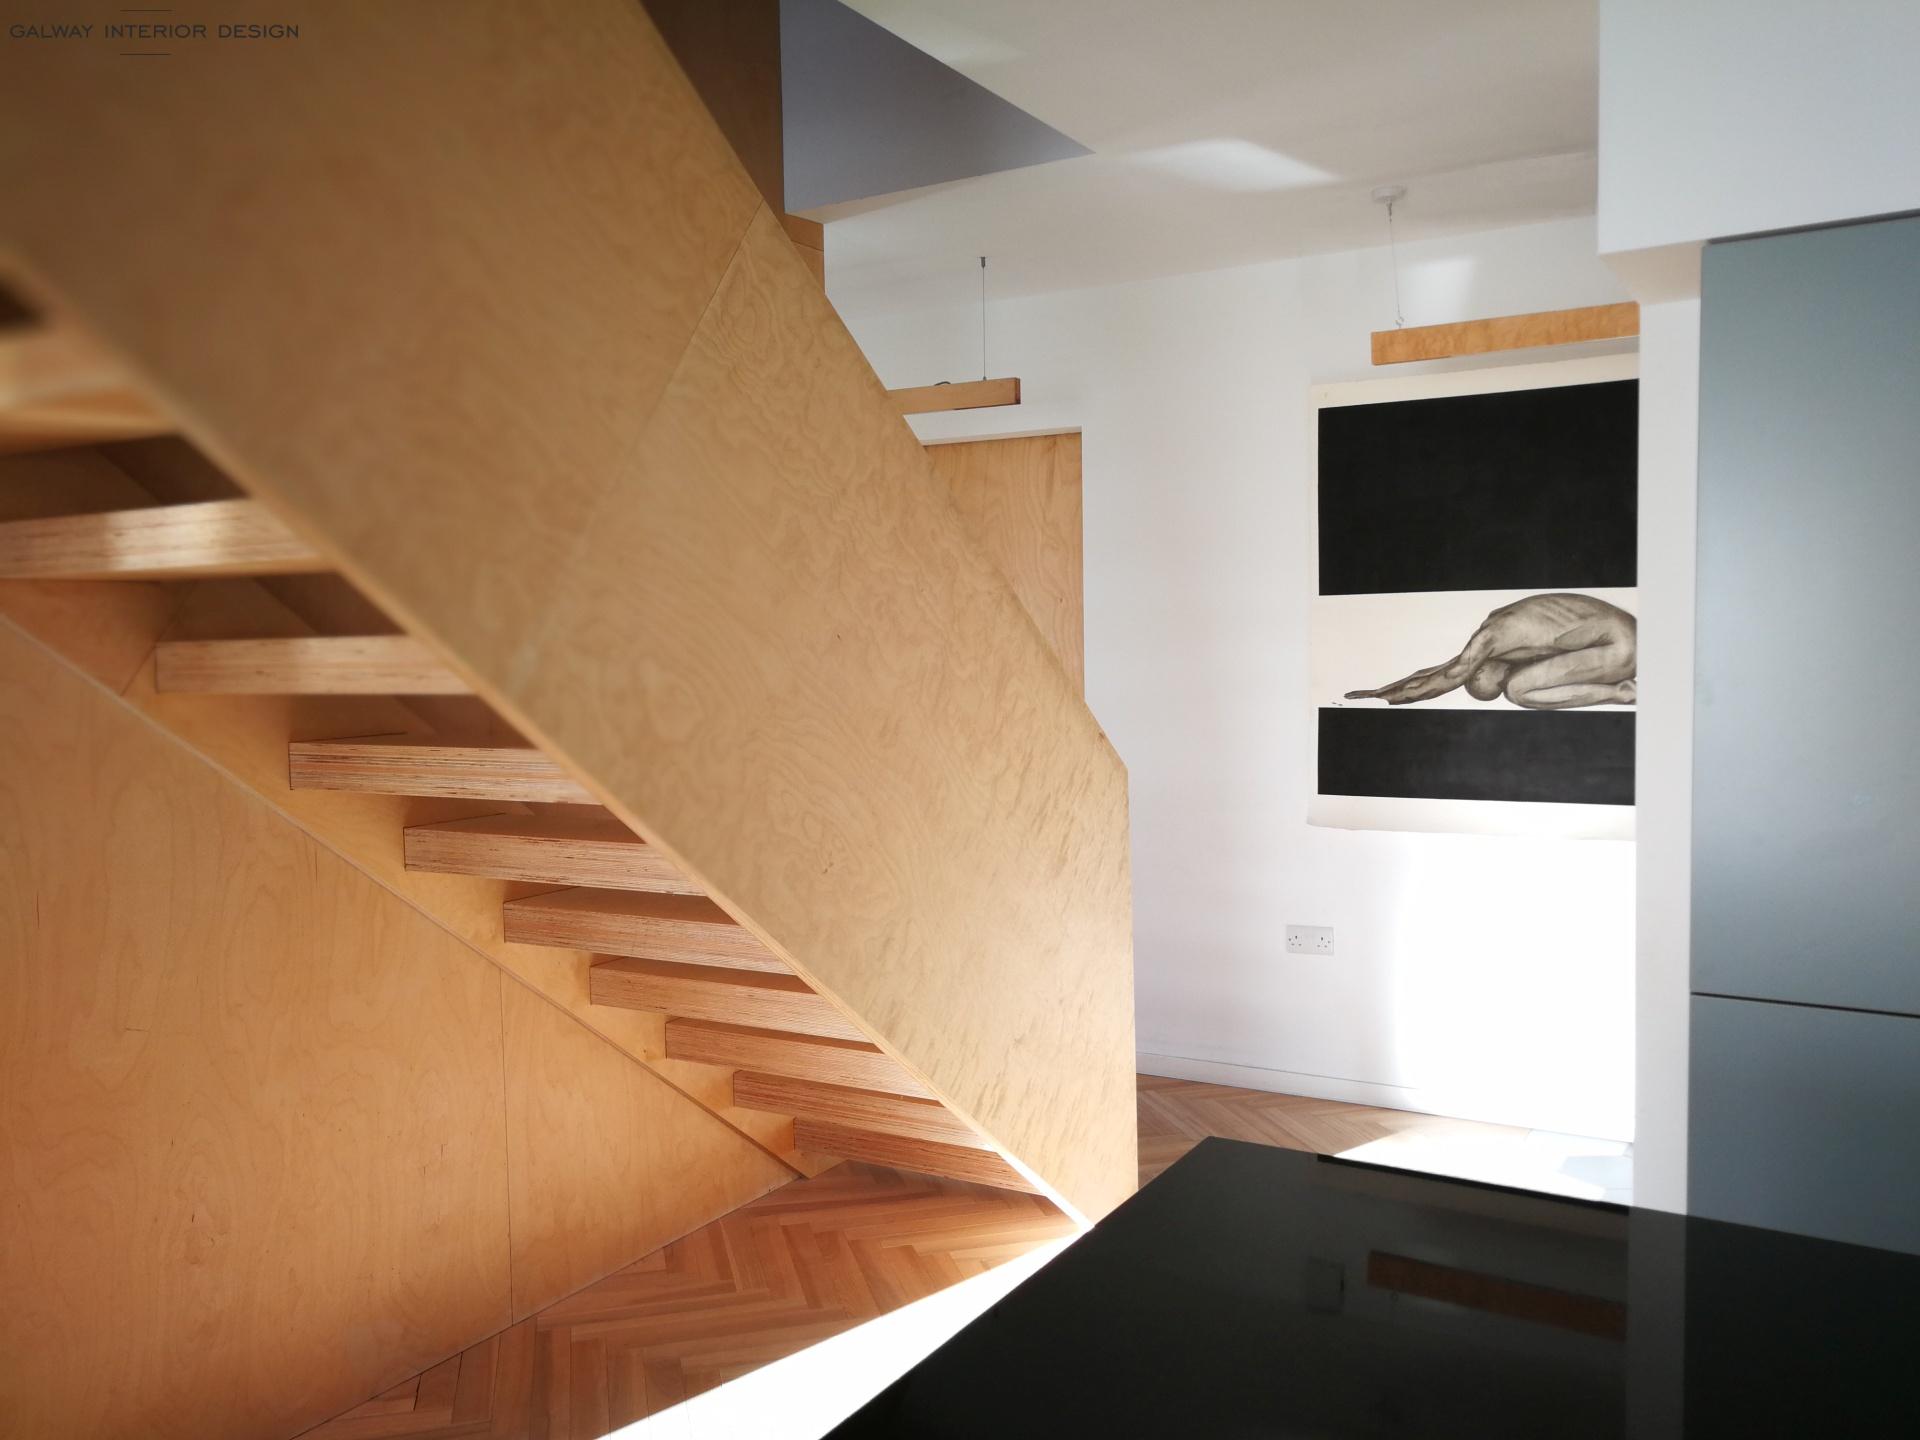 Galway Interior Design Design Simple White Black Plywood Stairs 2